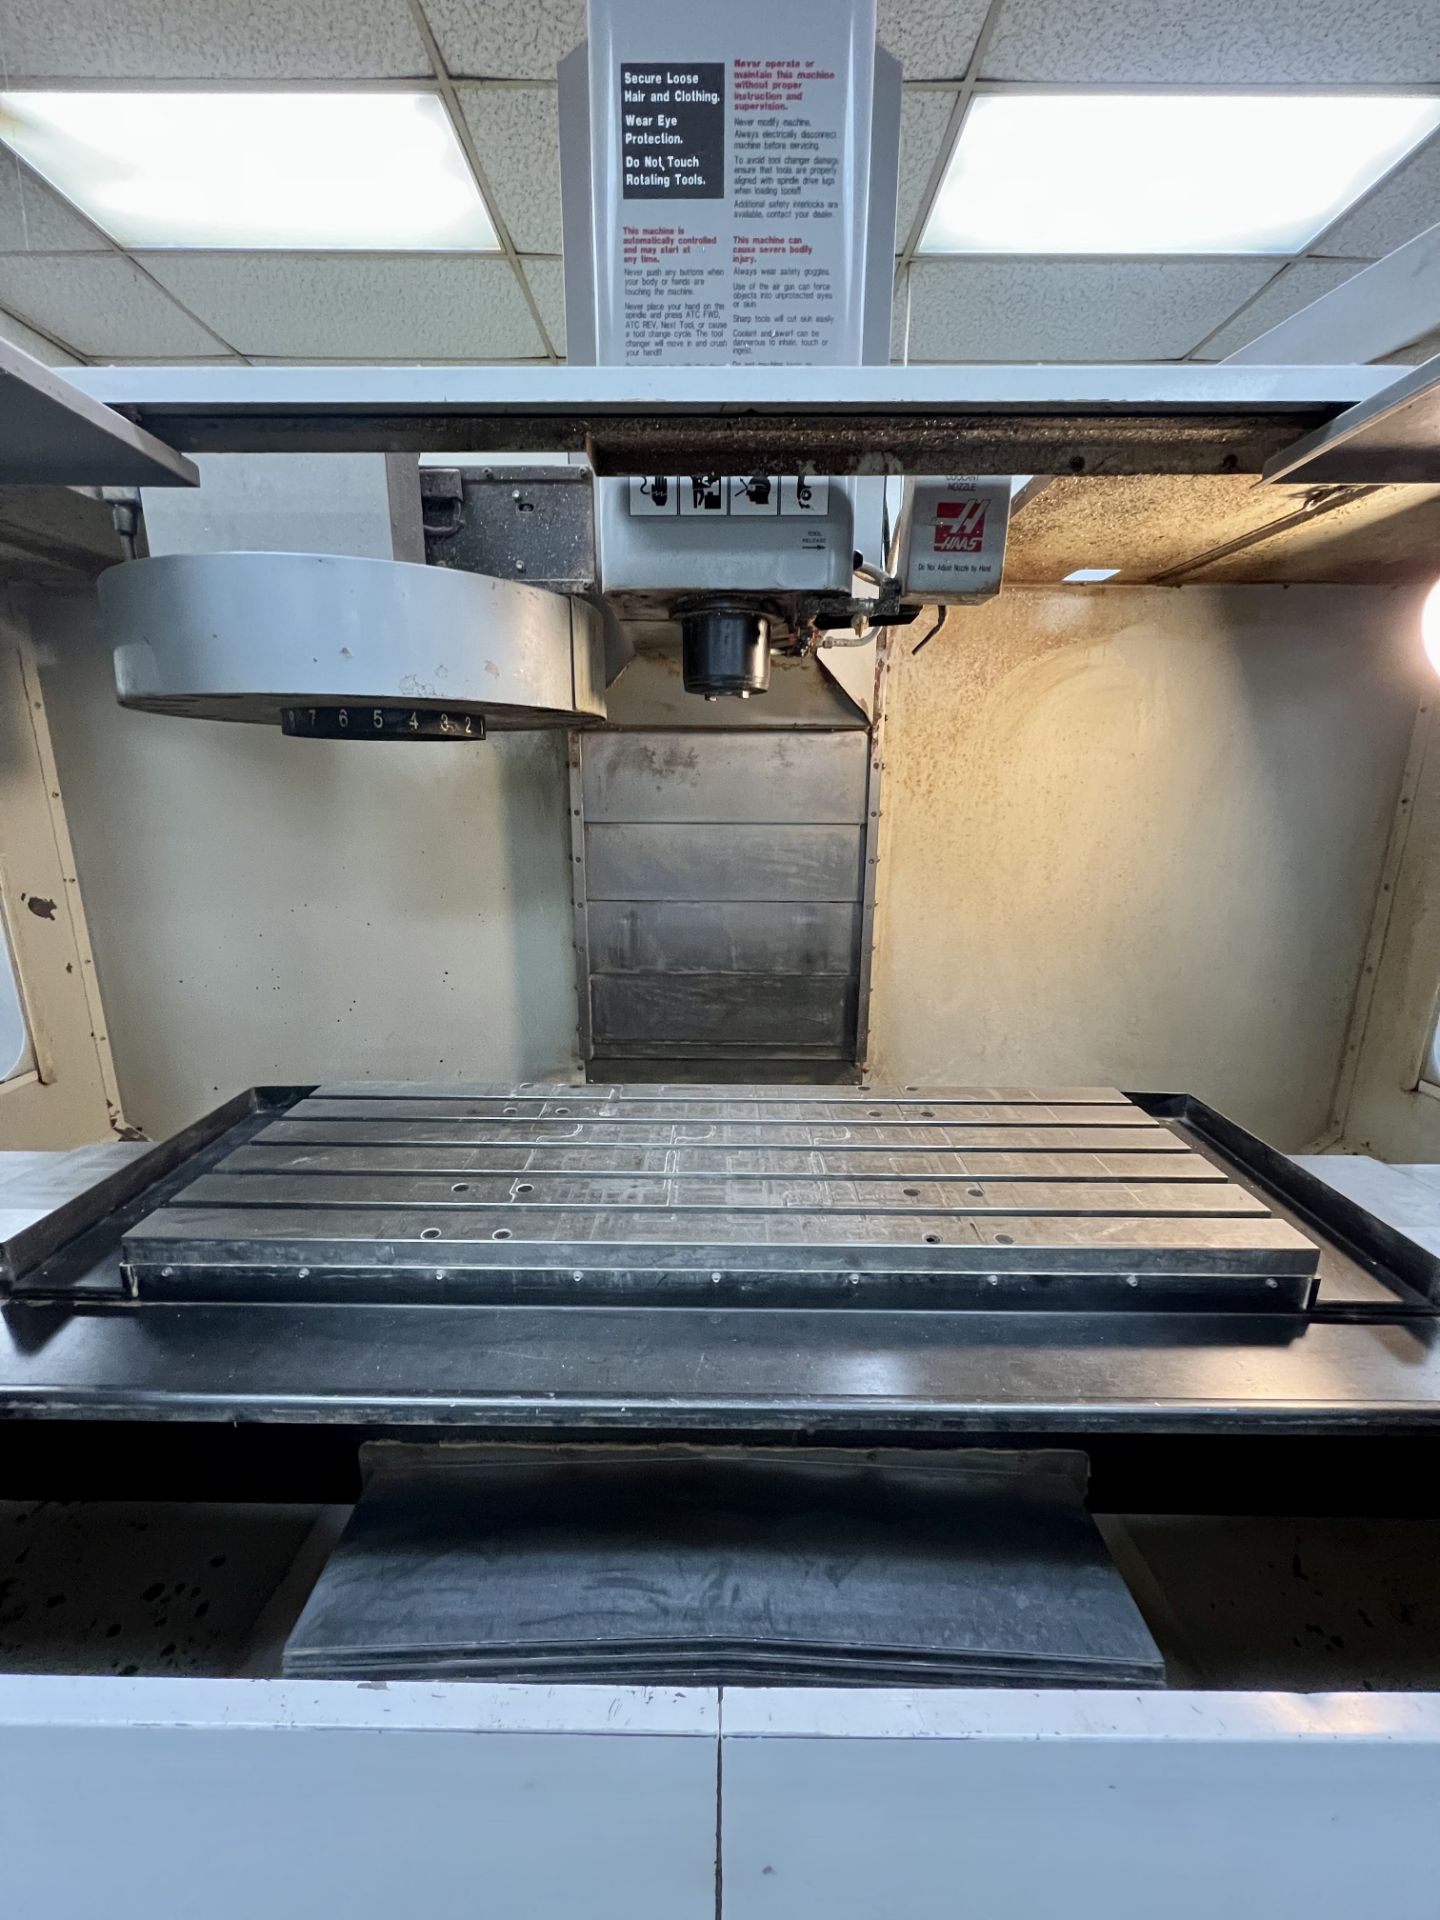 2003 HAAS VF-4D VERTICAL MACHINING CENTER, VOP-C, XYZ TRAVELS: 50" X 20" X 25", 52" X 18" TABLE, 20 - Image 4 of 15